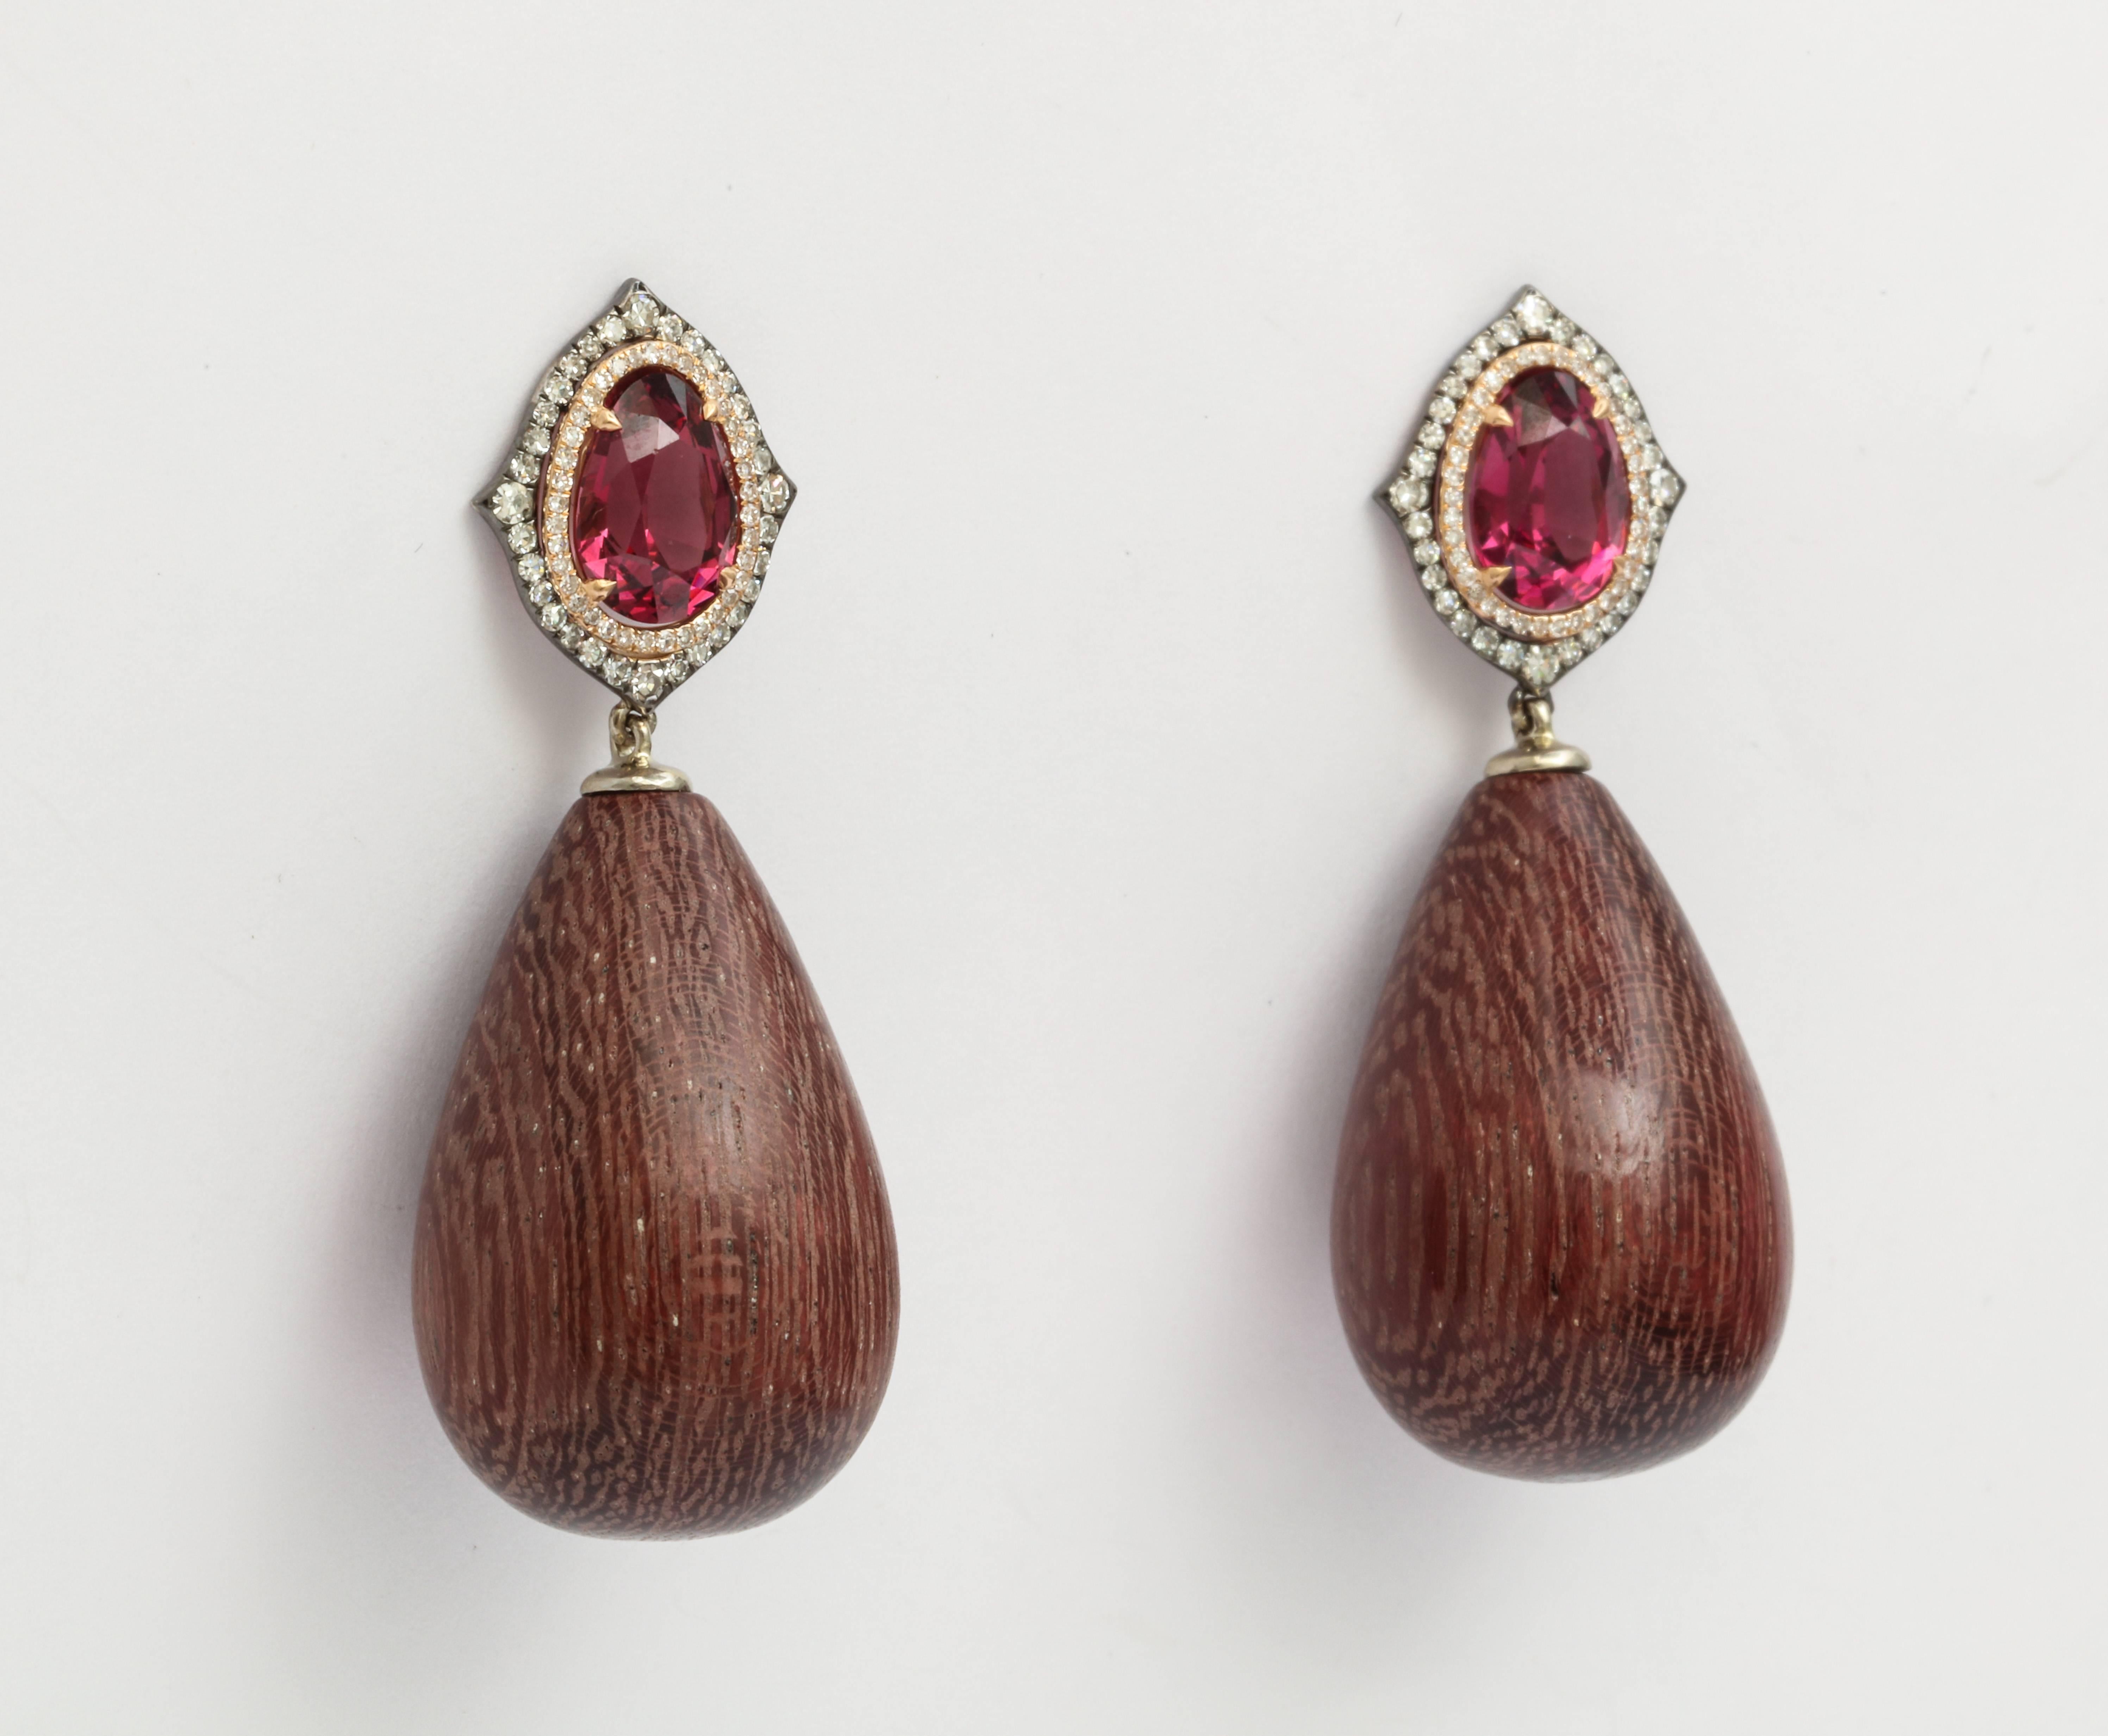 A pair of earrings featuring polished amaranth wood drops measuring 27 x 18mm. Set with 4.04 carats of rhodolite and 0.51 carats of diamonds in 18 karat gold. Friction backs.
